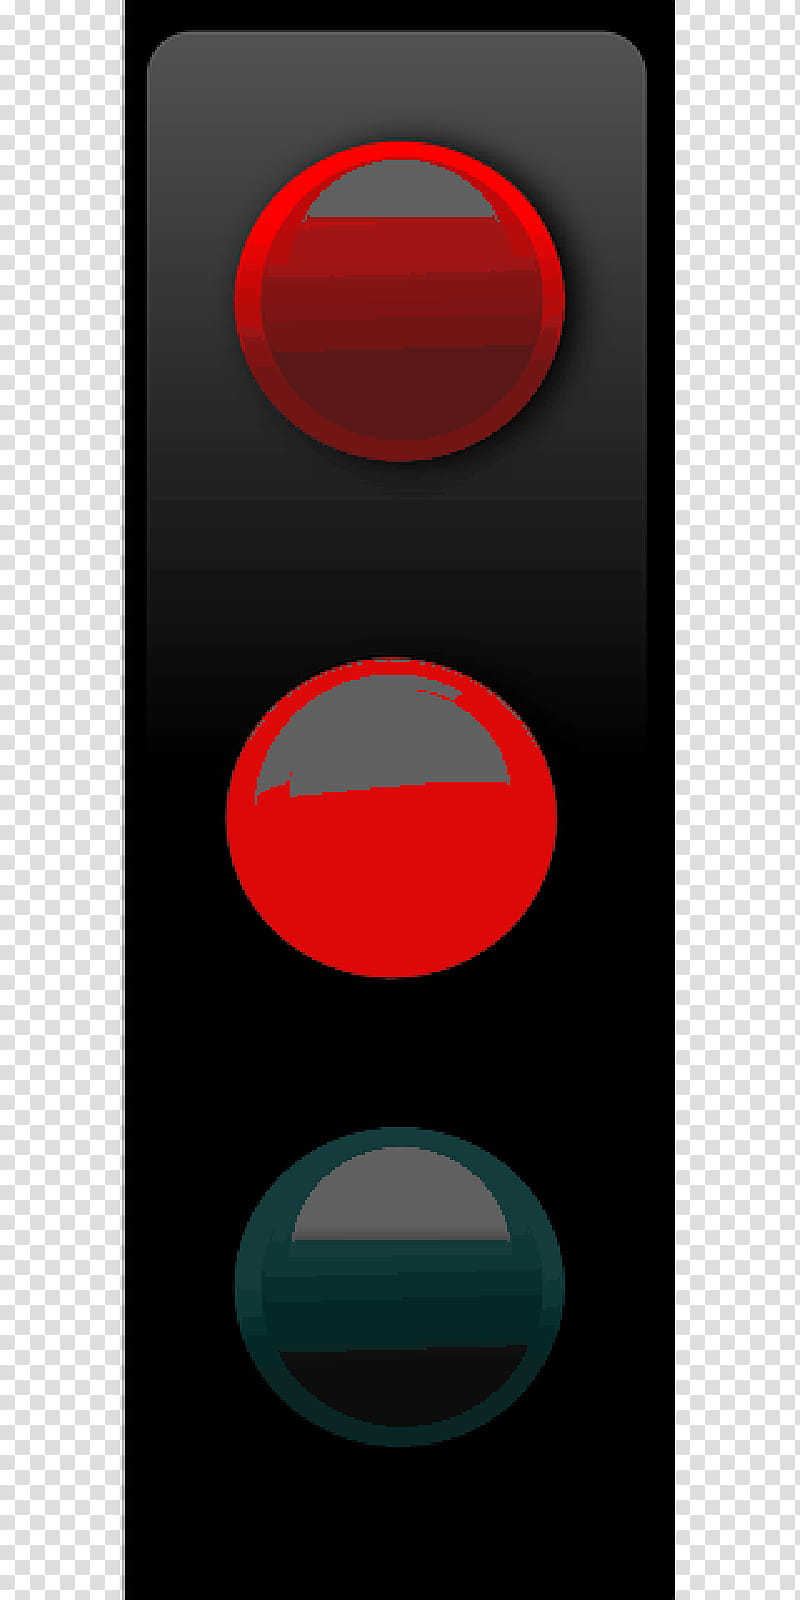 Traffic Light, Rectangle, Lighting, Signaling Device, Red, Signage, Technology, Light Fixture transparent background PNG clipart